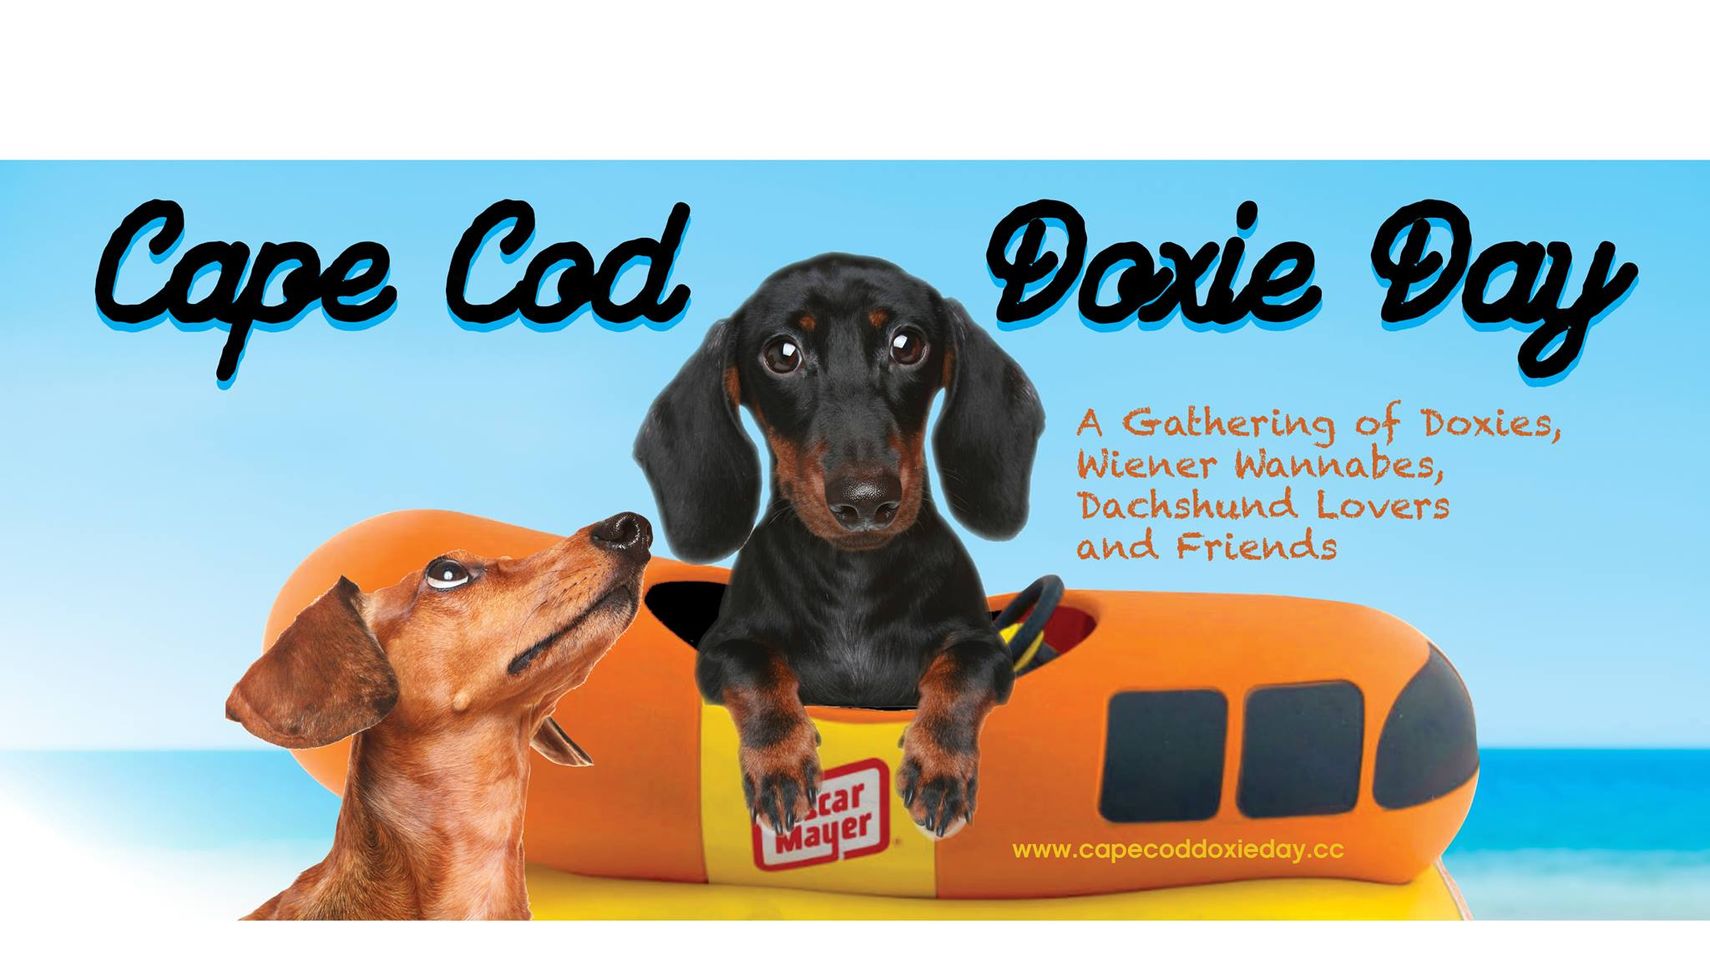 Cape Cod Doxie Day